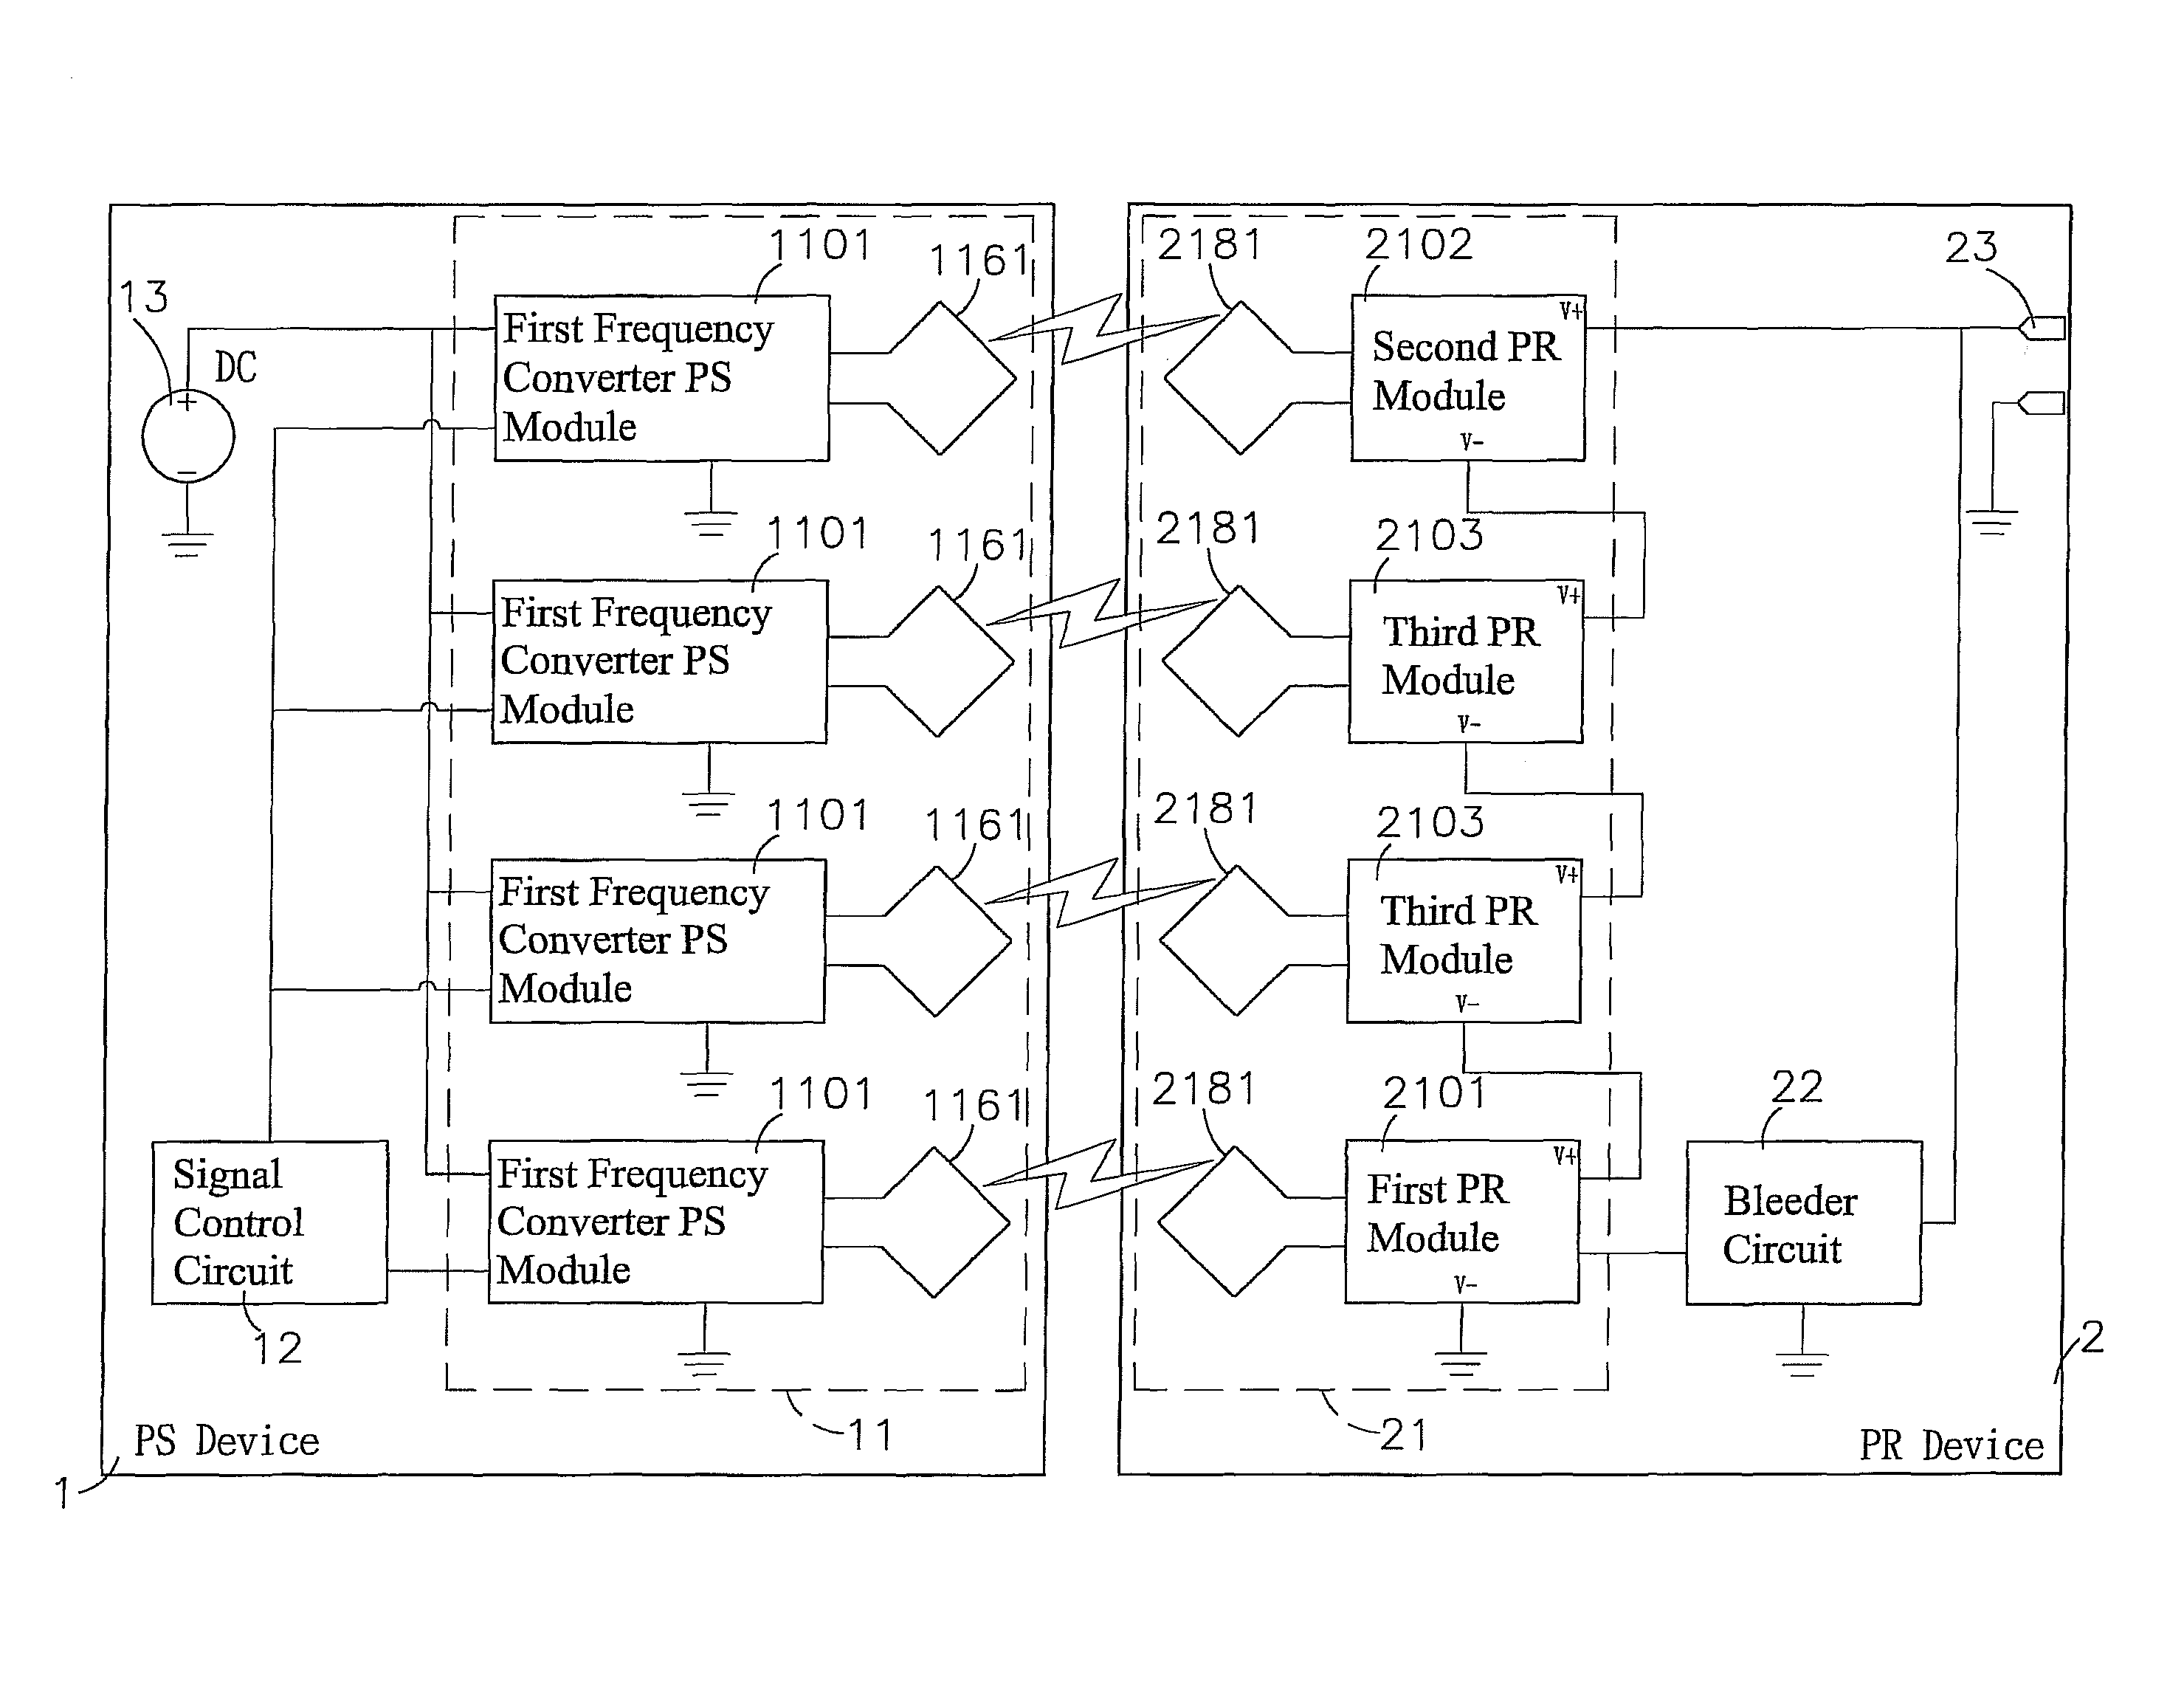 Inductive charging method for vehicles